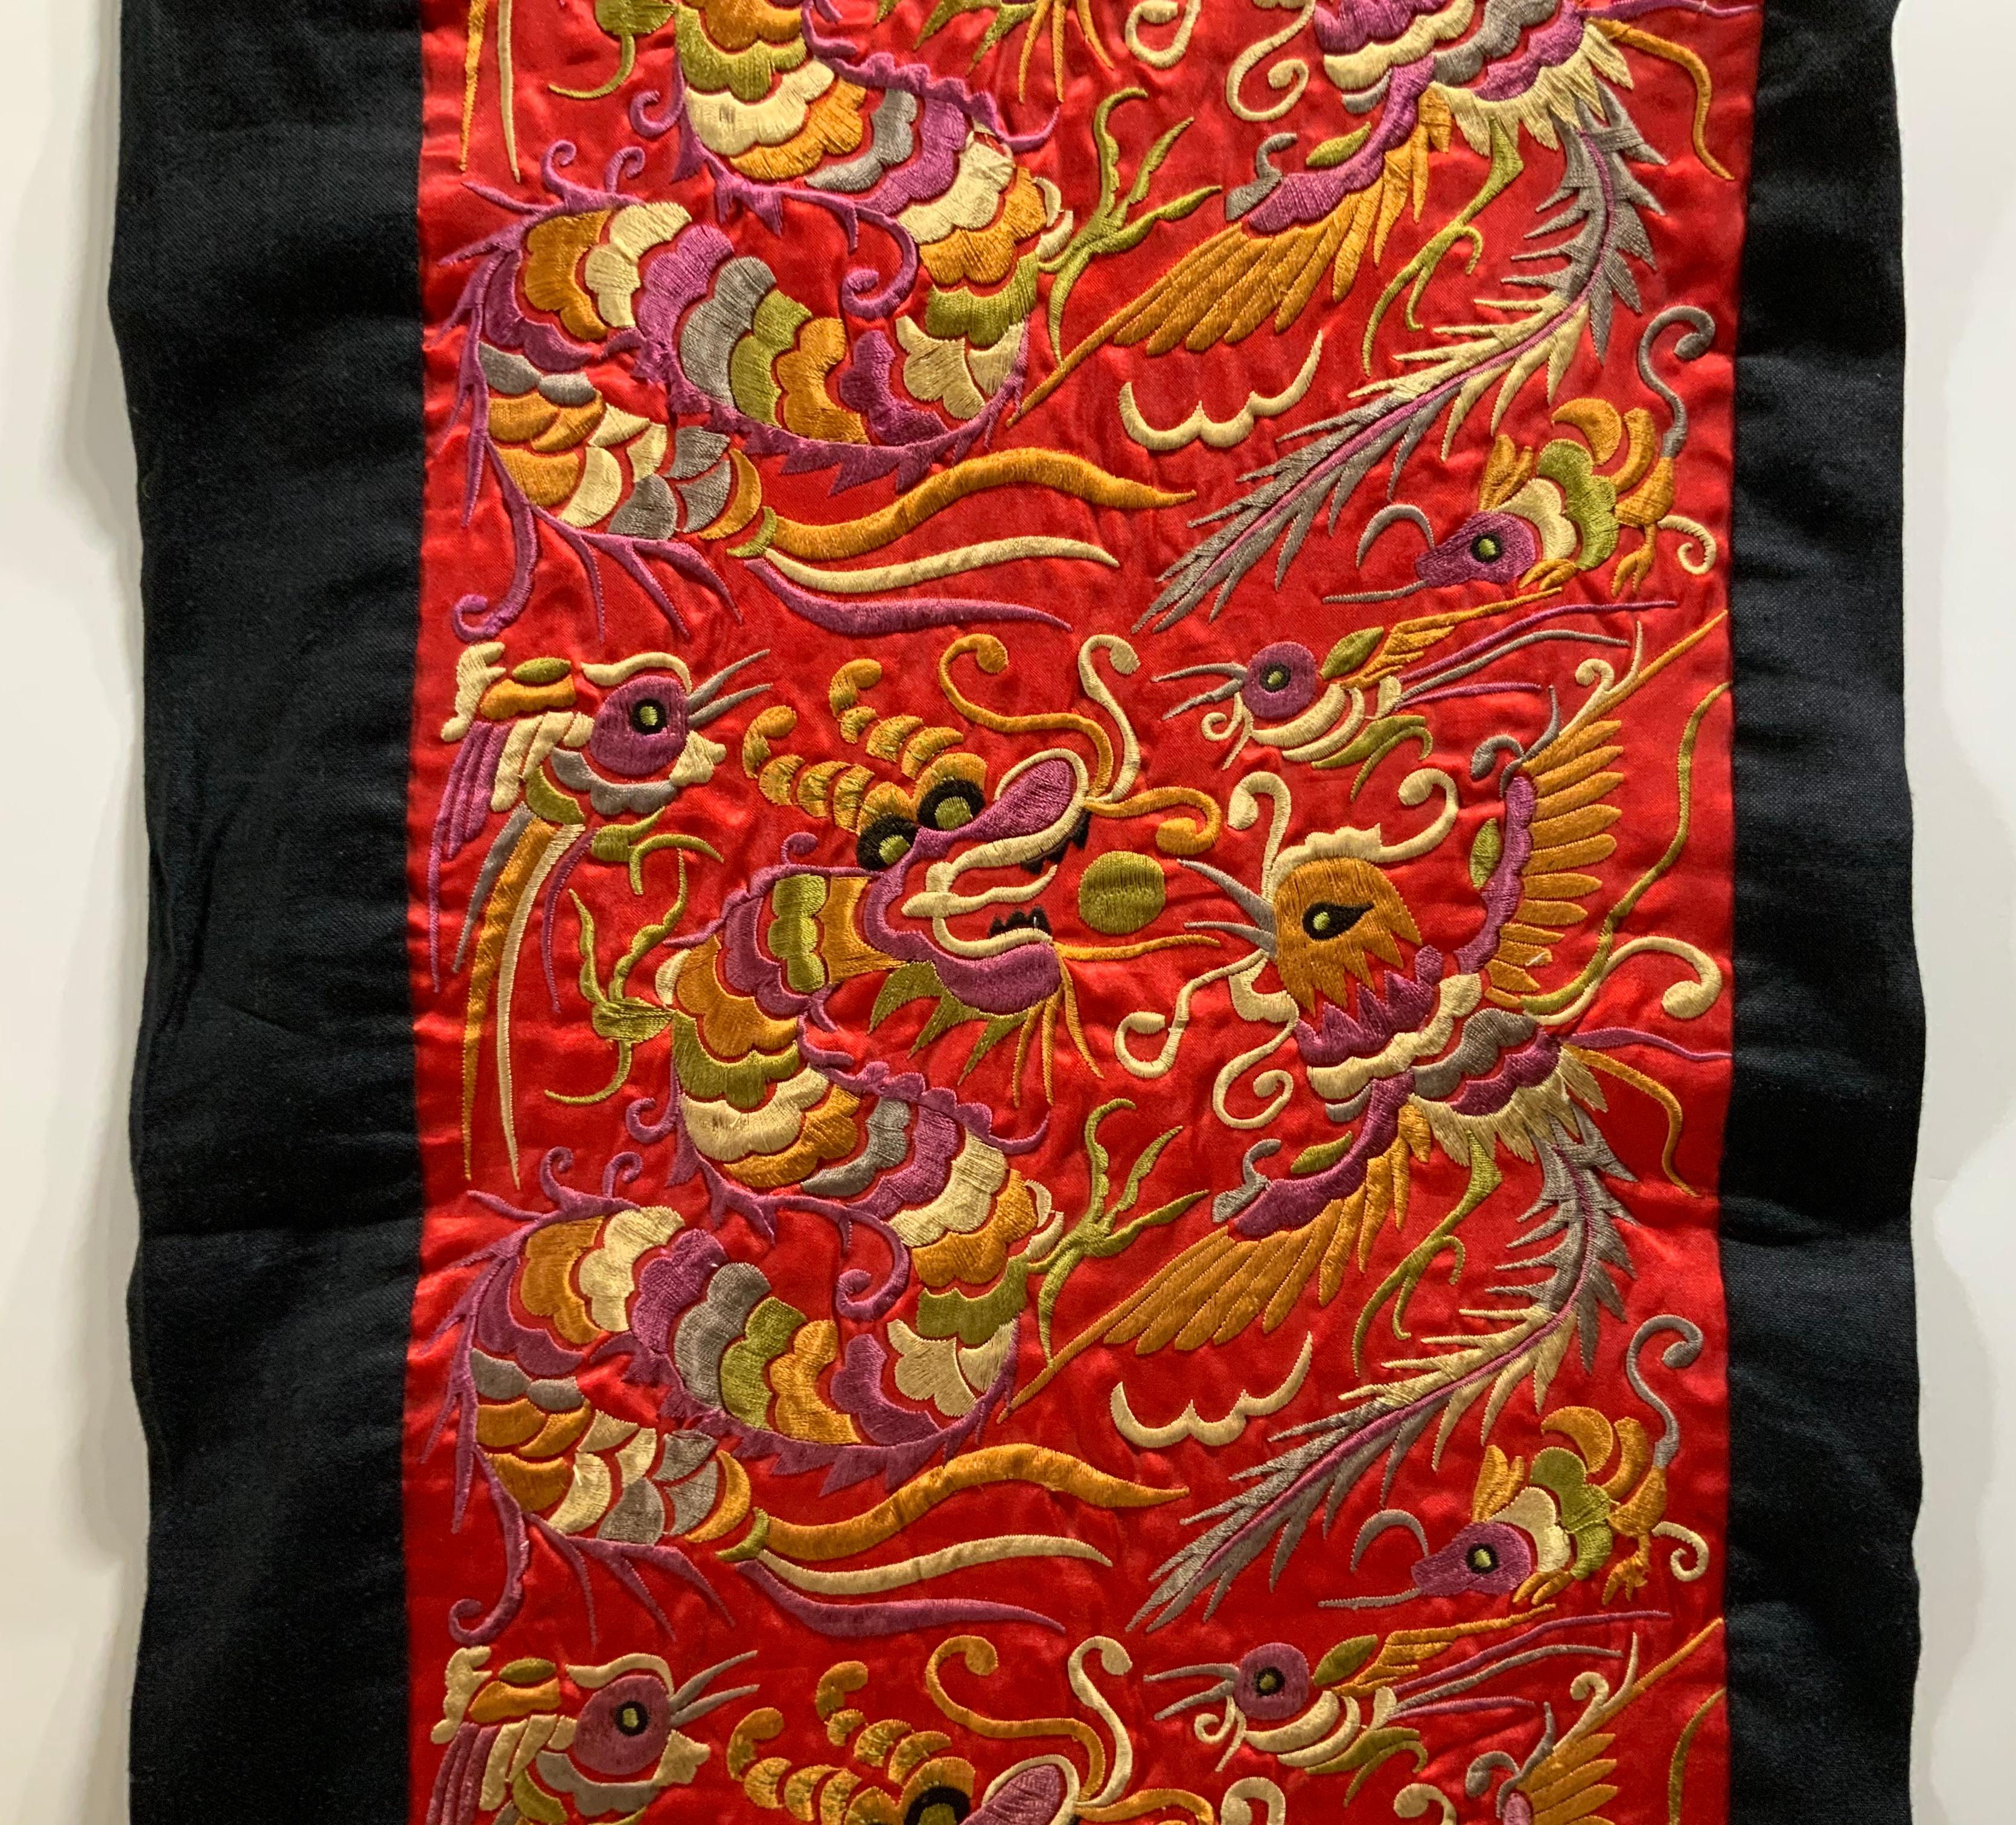 it is a large elaborately embroidered wall hanging made in kyrgyzstan and kazakhstan